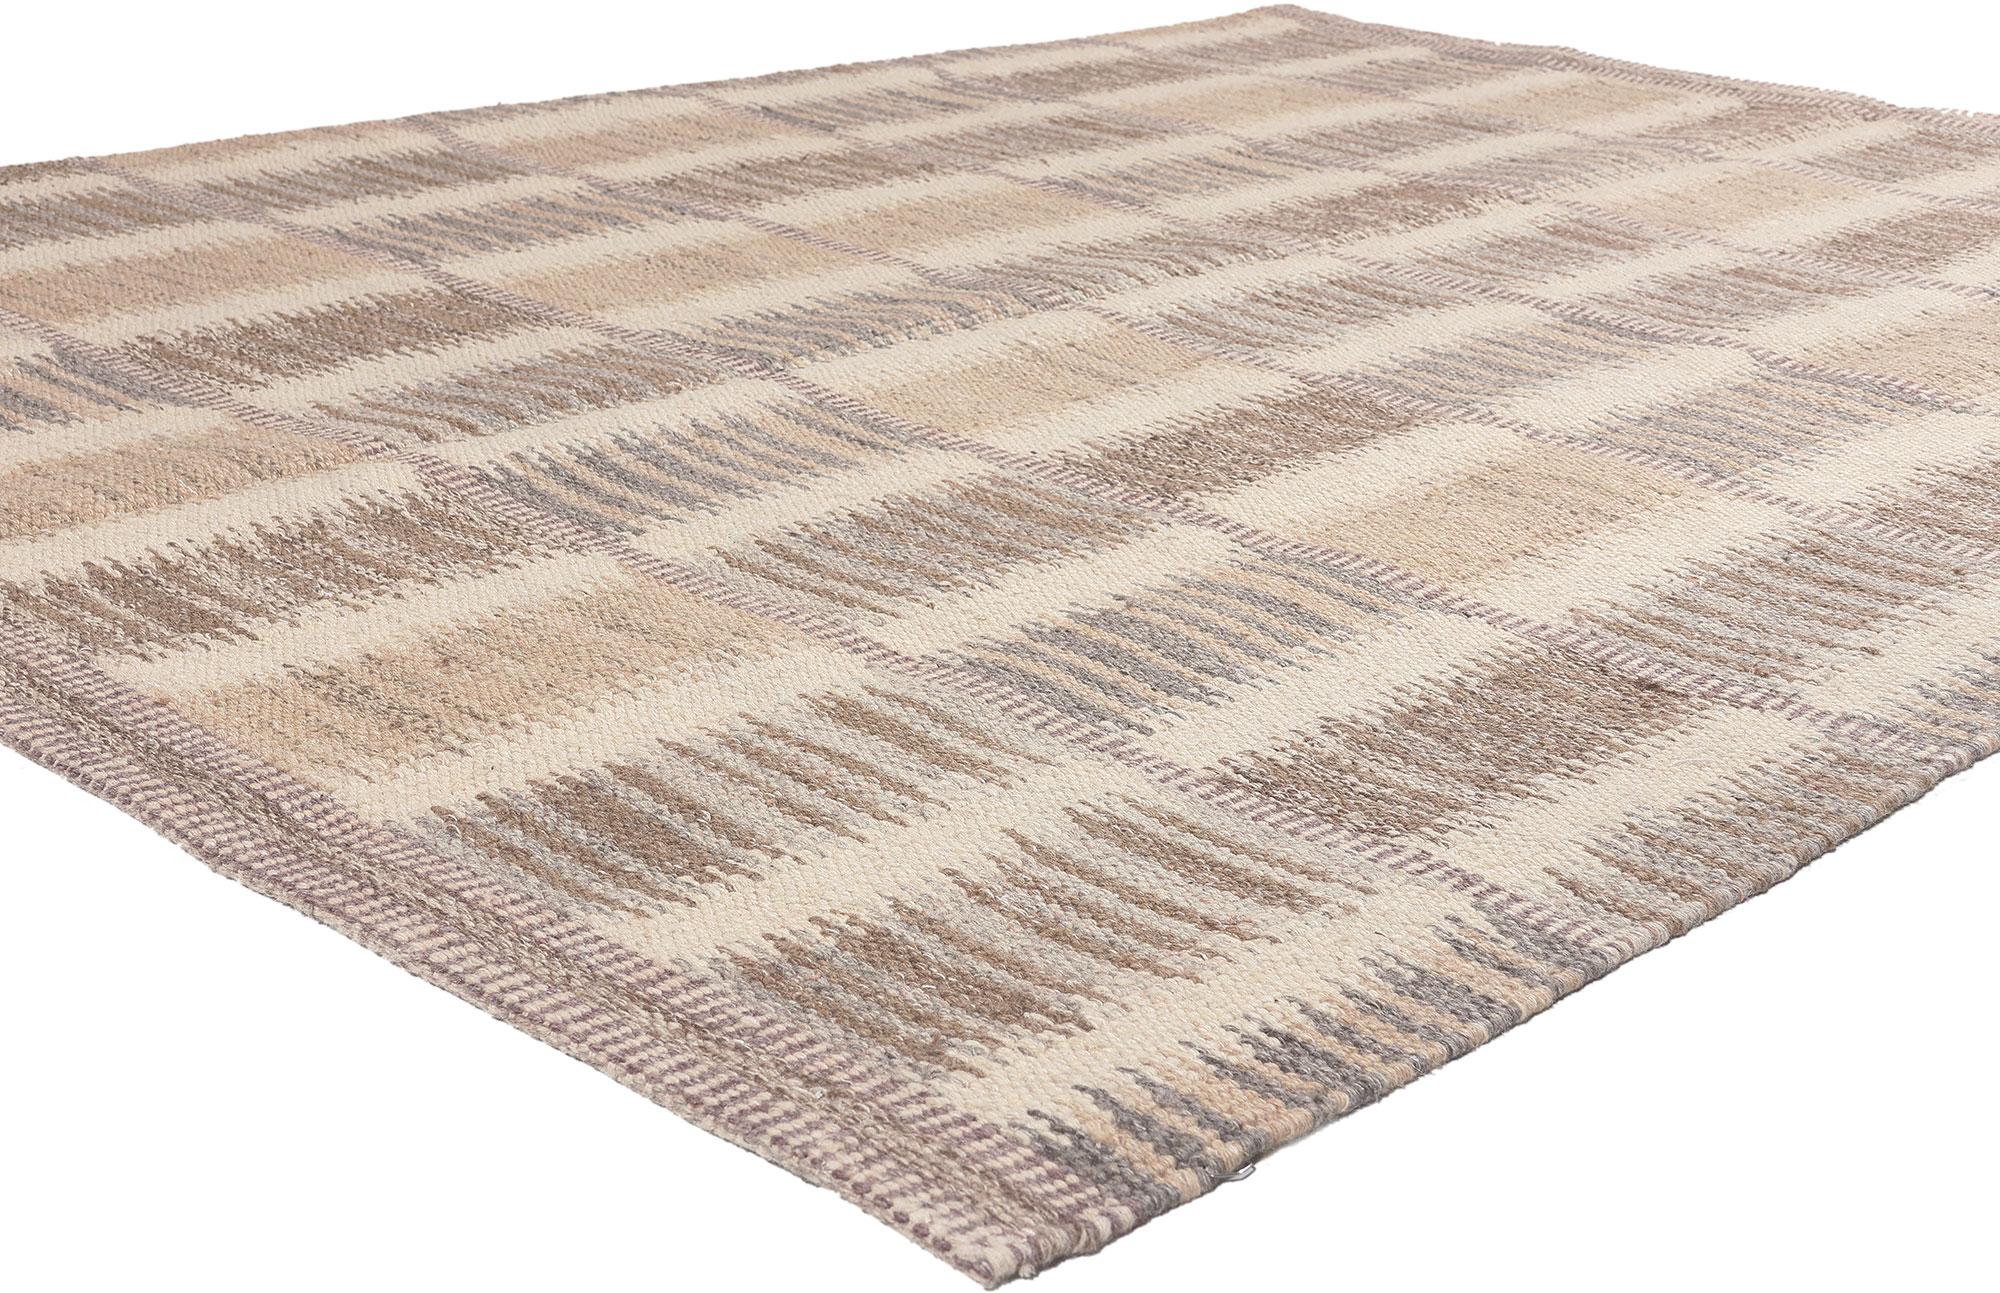 30640 New Swedish Inspired Kilim Rug, 06'04 x 08'09.
Scandinavian Modern style meets subtle shibui in this handwoven Swedish inspired Kilim rug. The intrinsic geometric design and neutral earthy hues woven into this piece work together creating calm